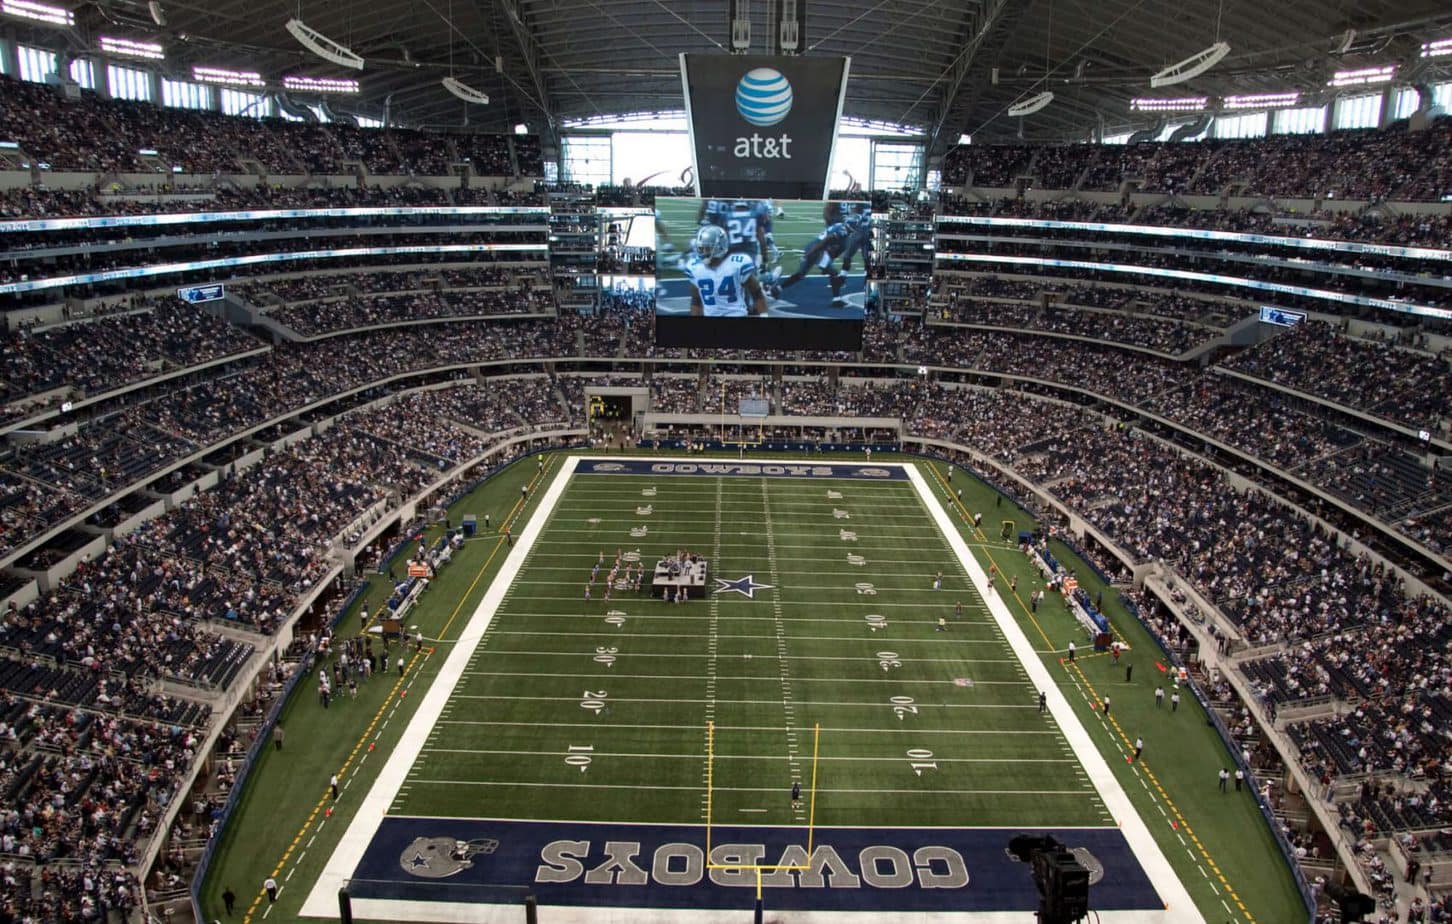 The AT&T stadium were the Dallas Cowboys are just about to play a game